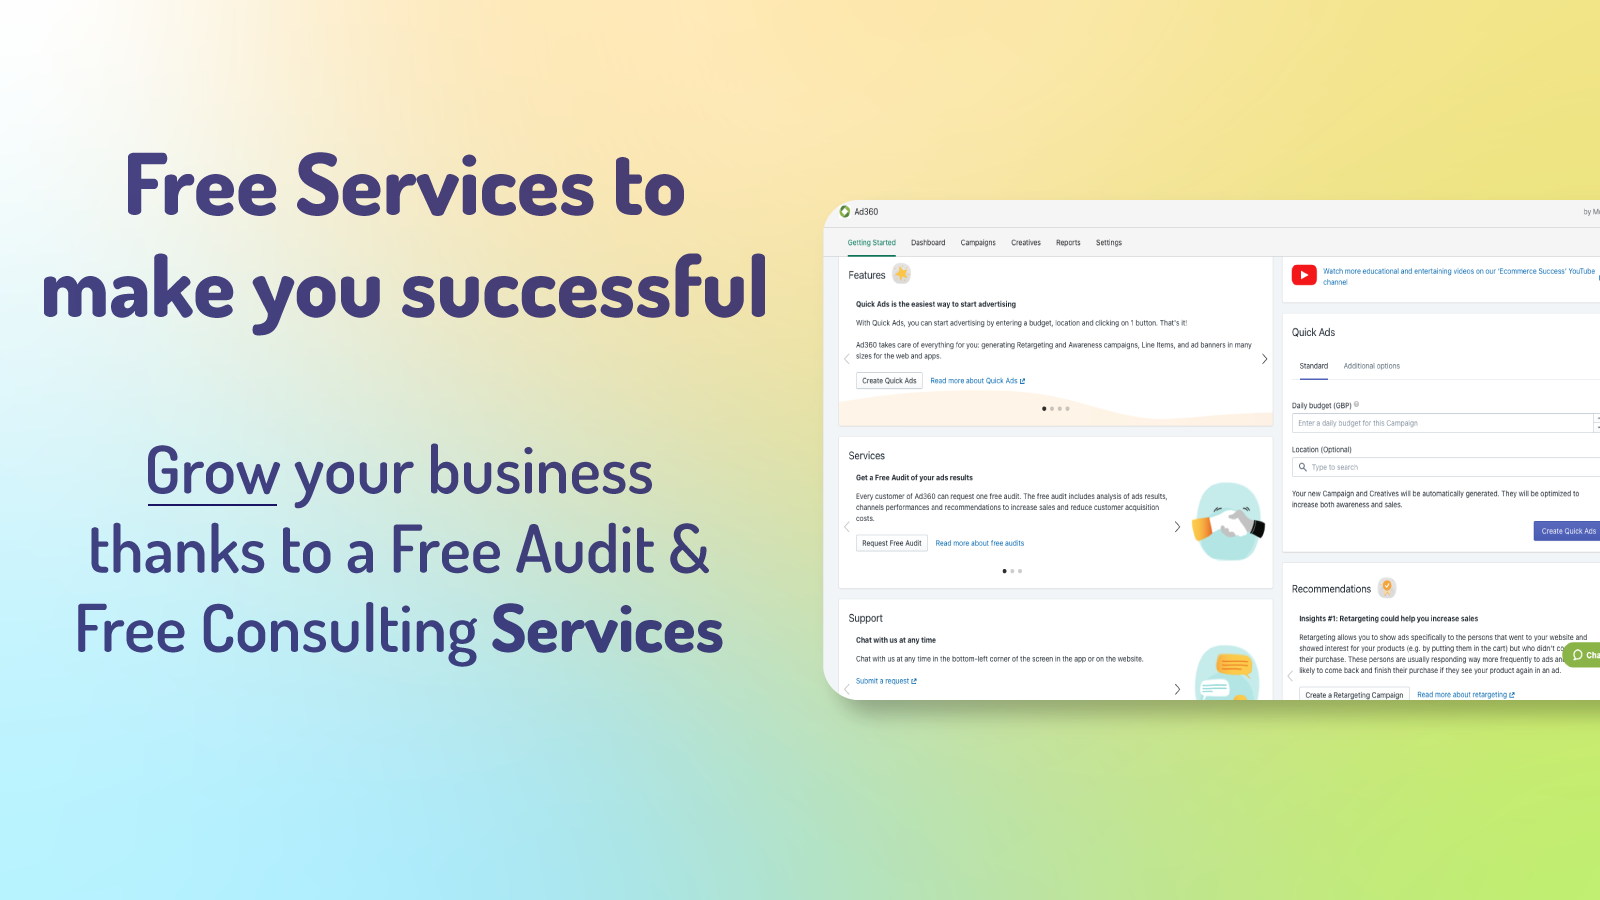 Free services to make you successful: Free Audit & Consulting